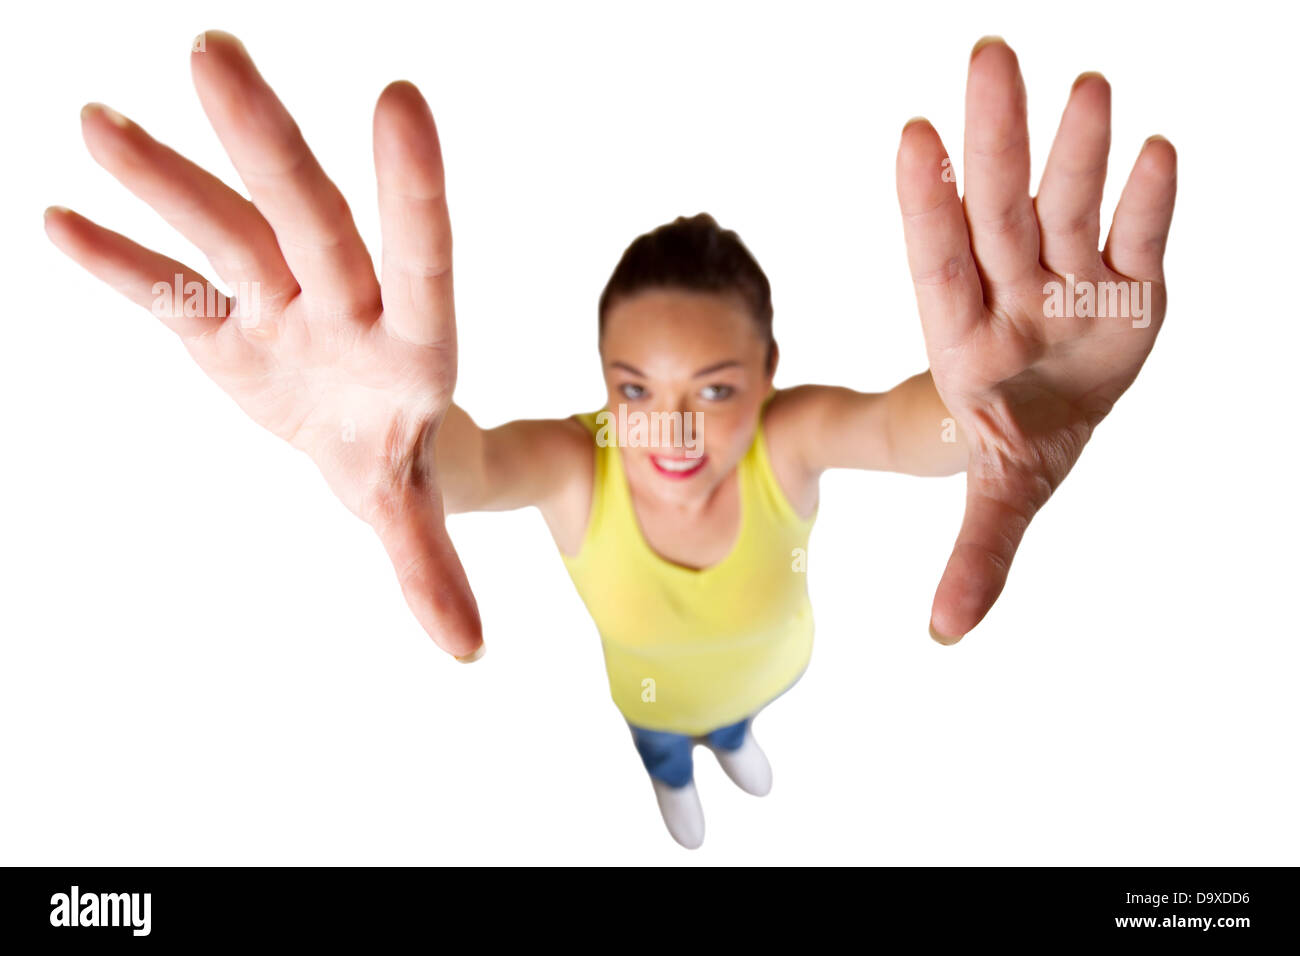 distorted photo of young woman reach out Stock Photo